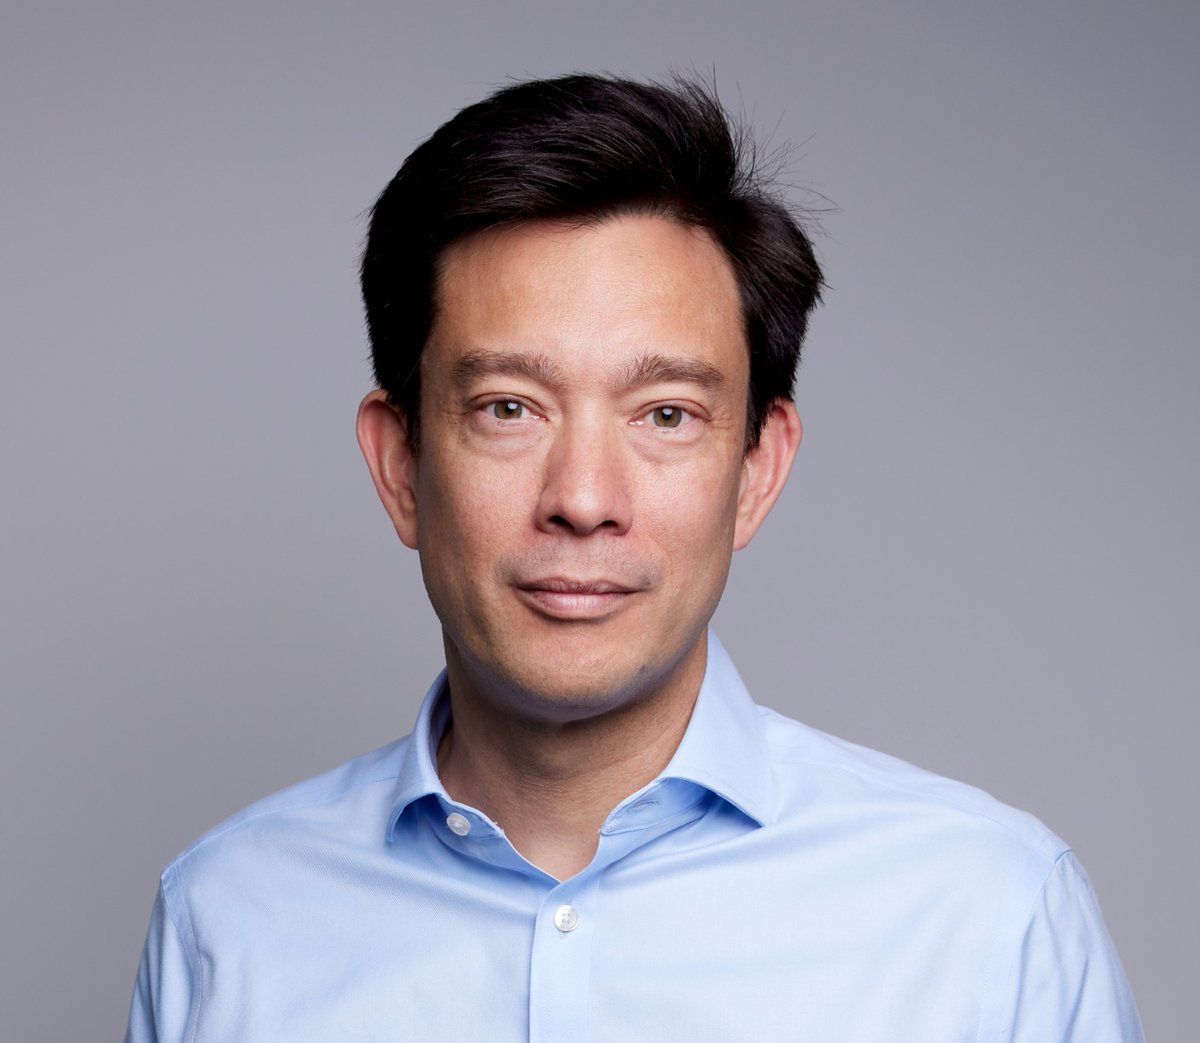 We’re delighted to welcome Professor Jason Chin as one of our speakers at #AstburyConv!

Prof. Chin is a multi-award winner who has pioneered the development and application of methods for reprogramming the genetic code of living organisms.

Register now: eu.eventscloud.com/website/11502/…